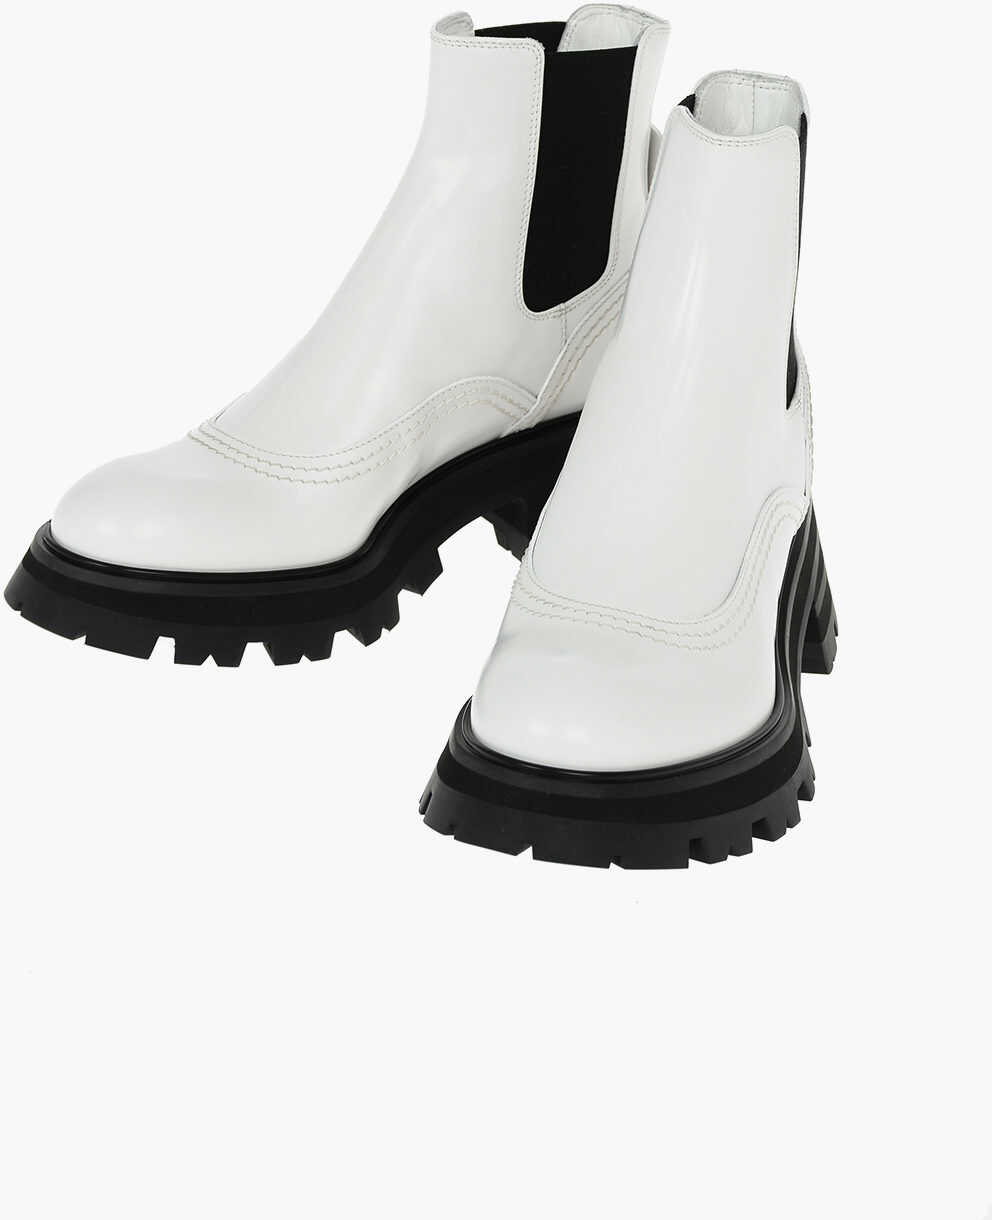 Alexander McQueen Leather Chelsea Ankle Boots With Statement Sole White Alexander McQueen